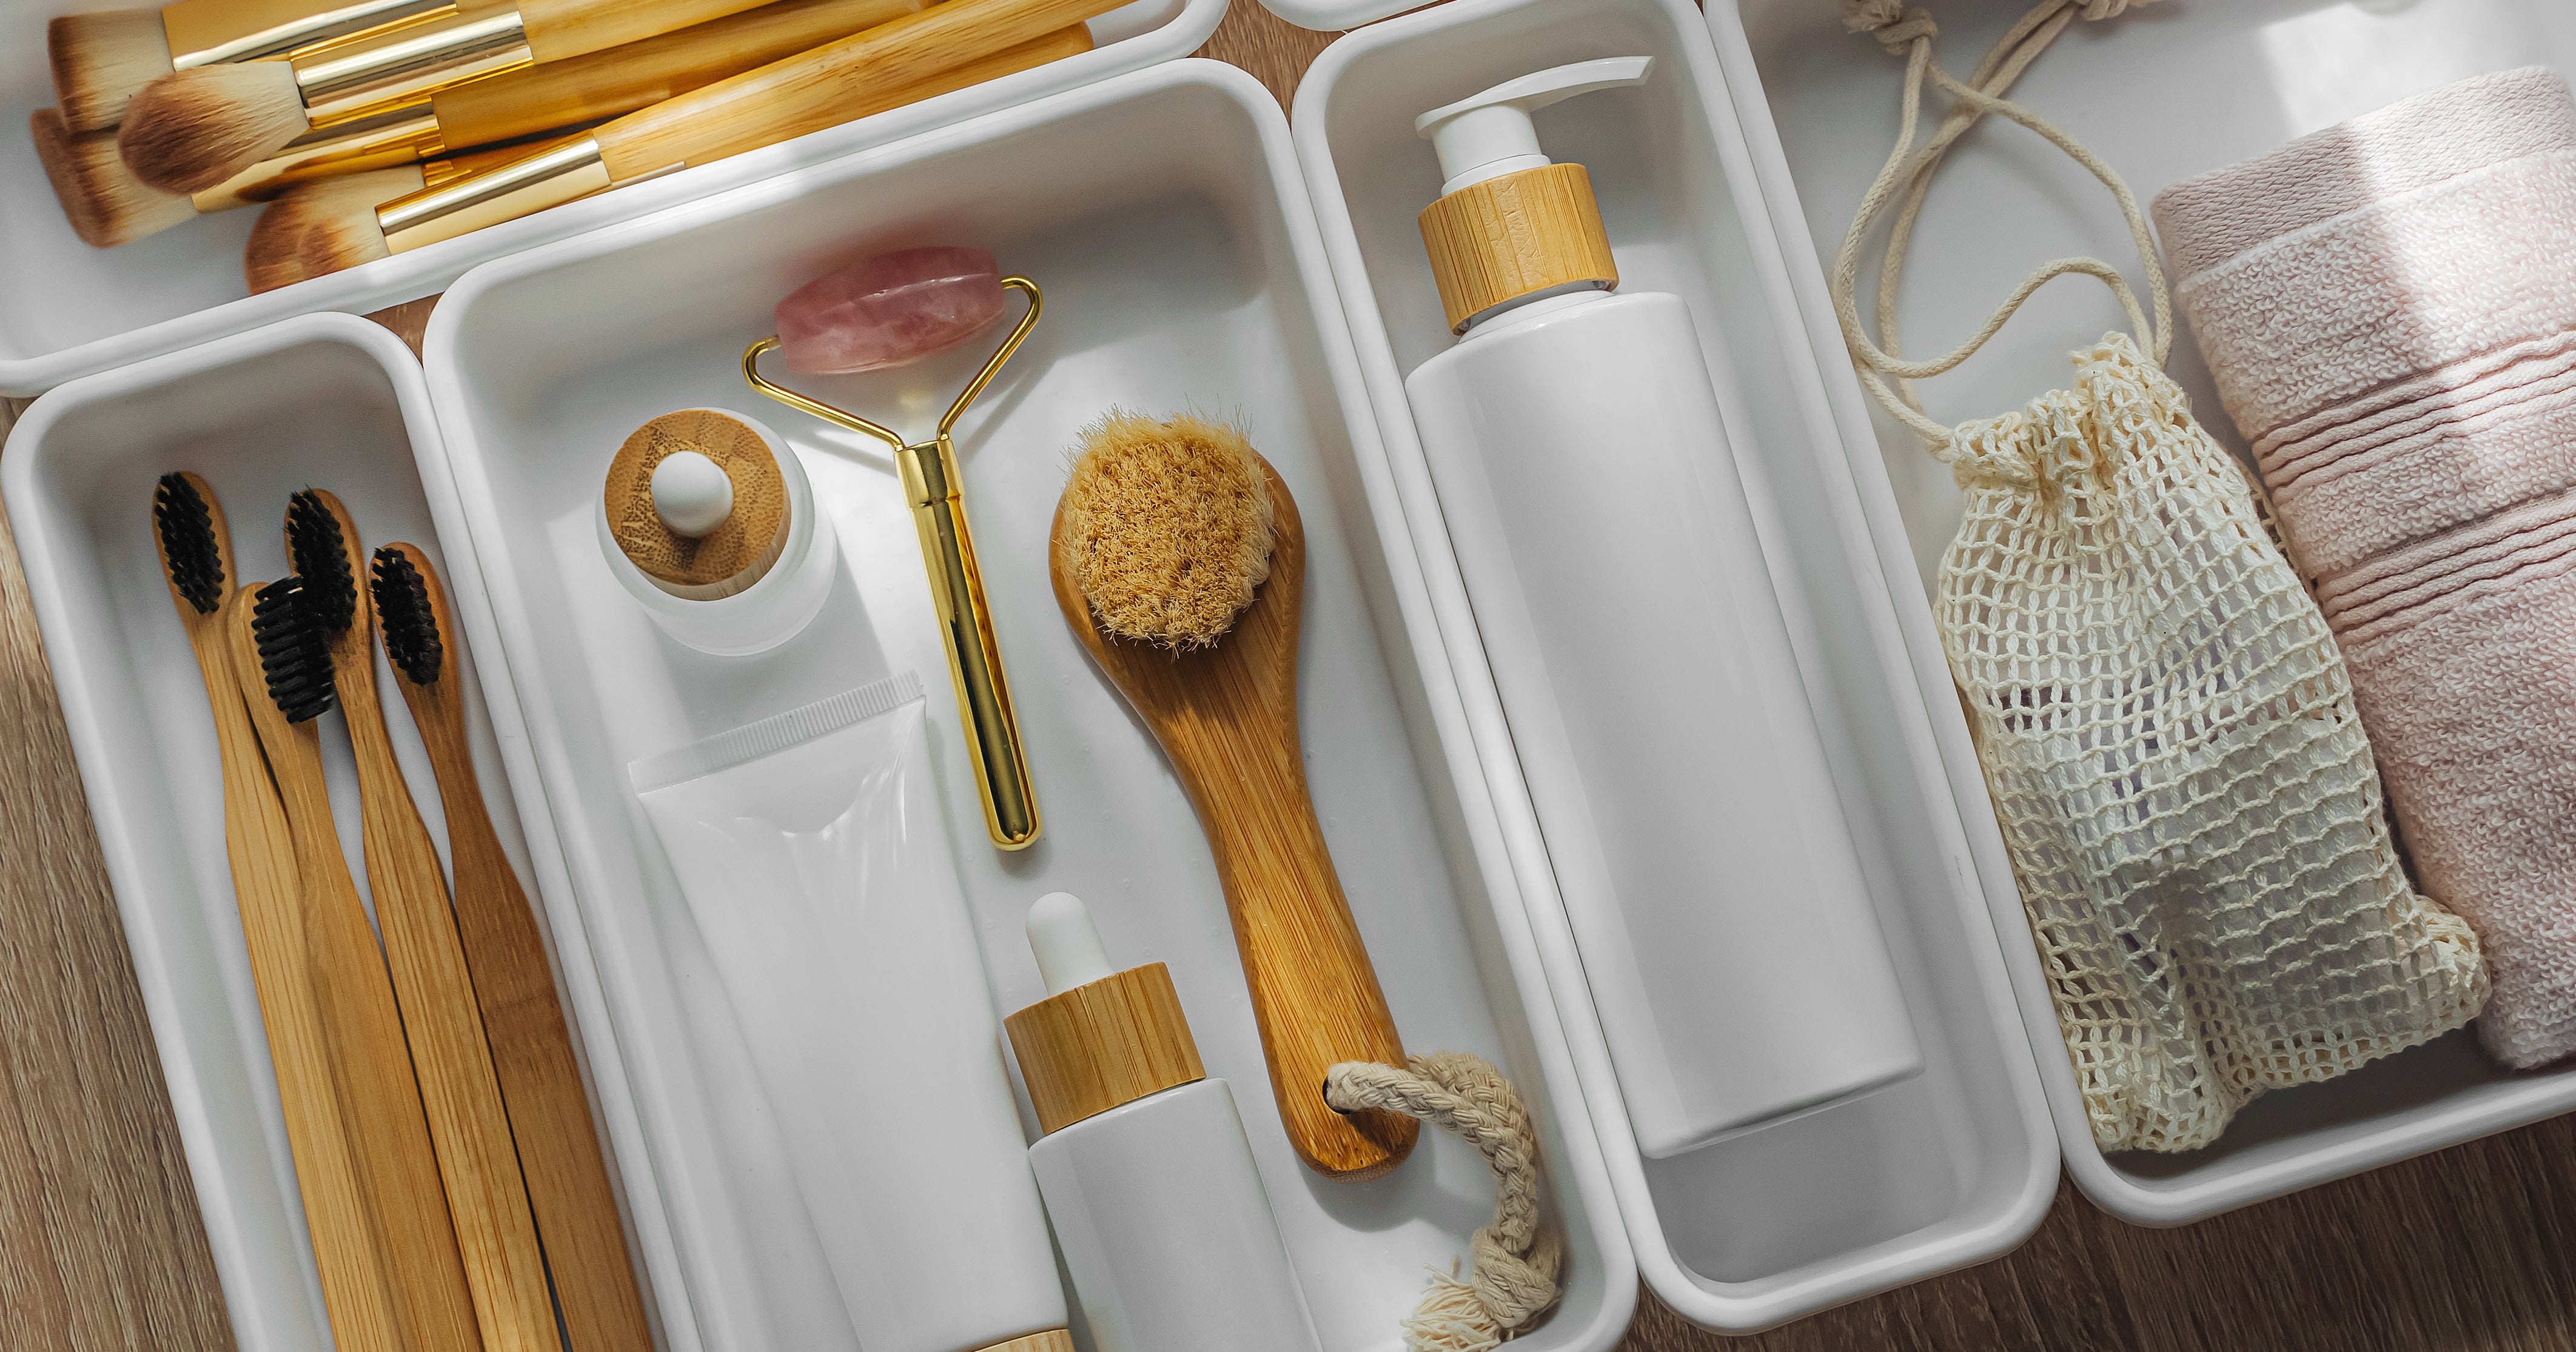 These Skin-Care Organizers Will Help You Feel Like You Have It All Together